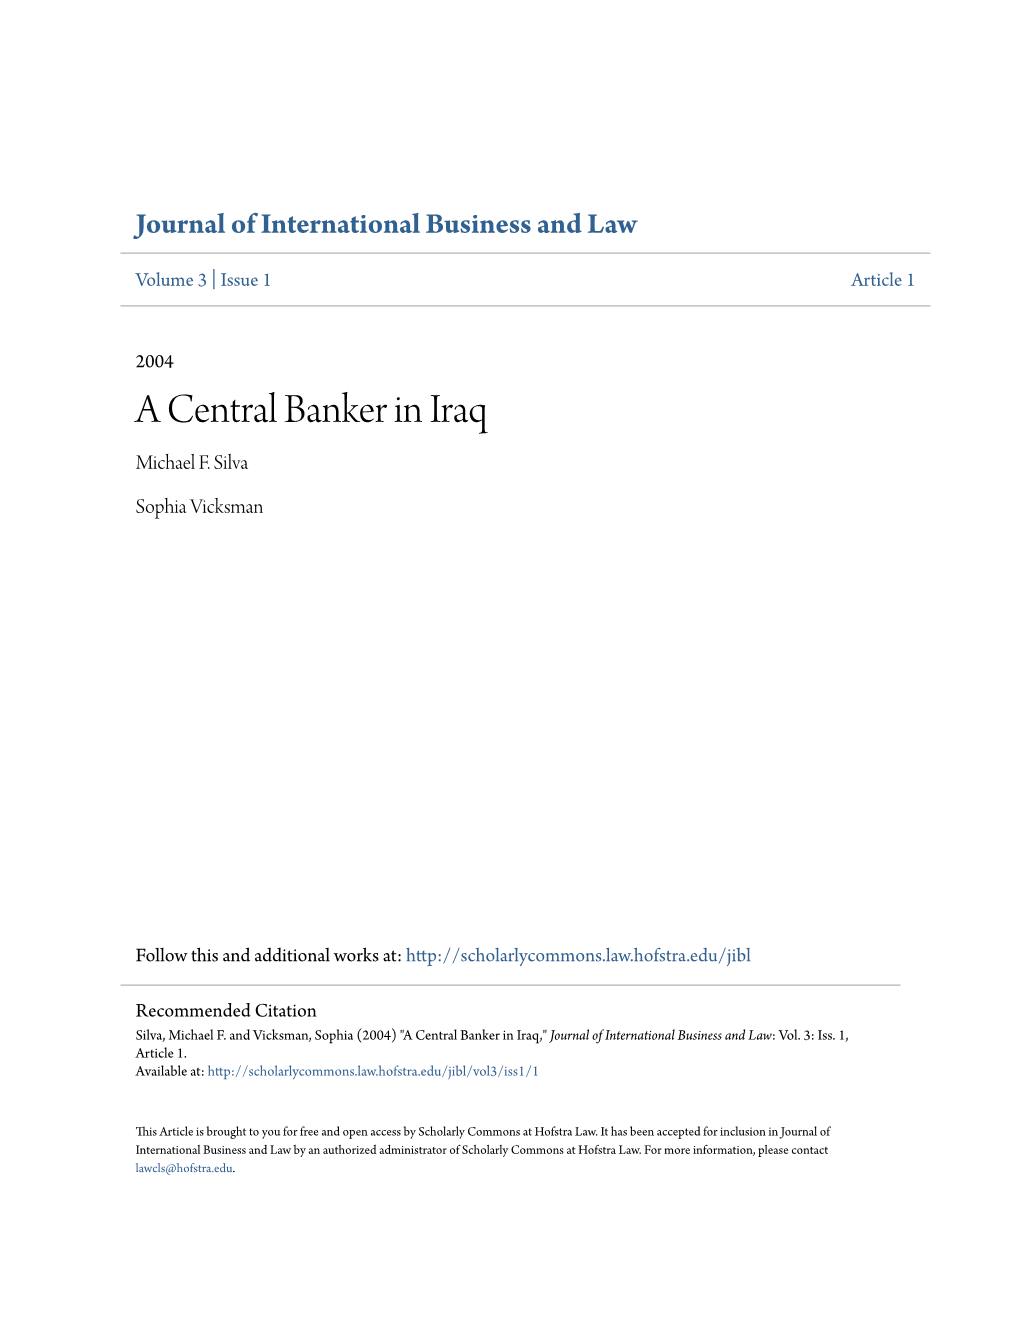 A Central Banker in Iraq Michael F